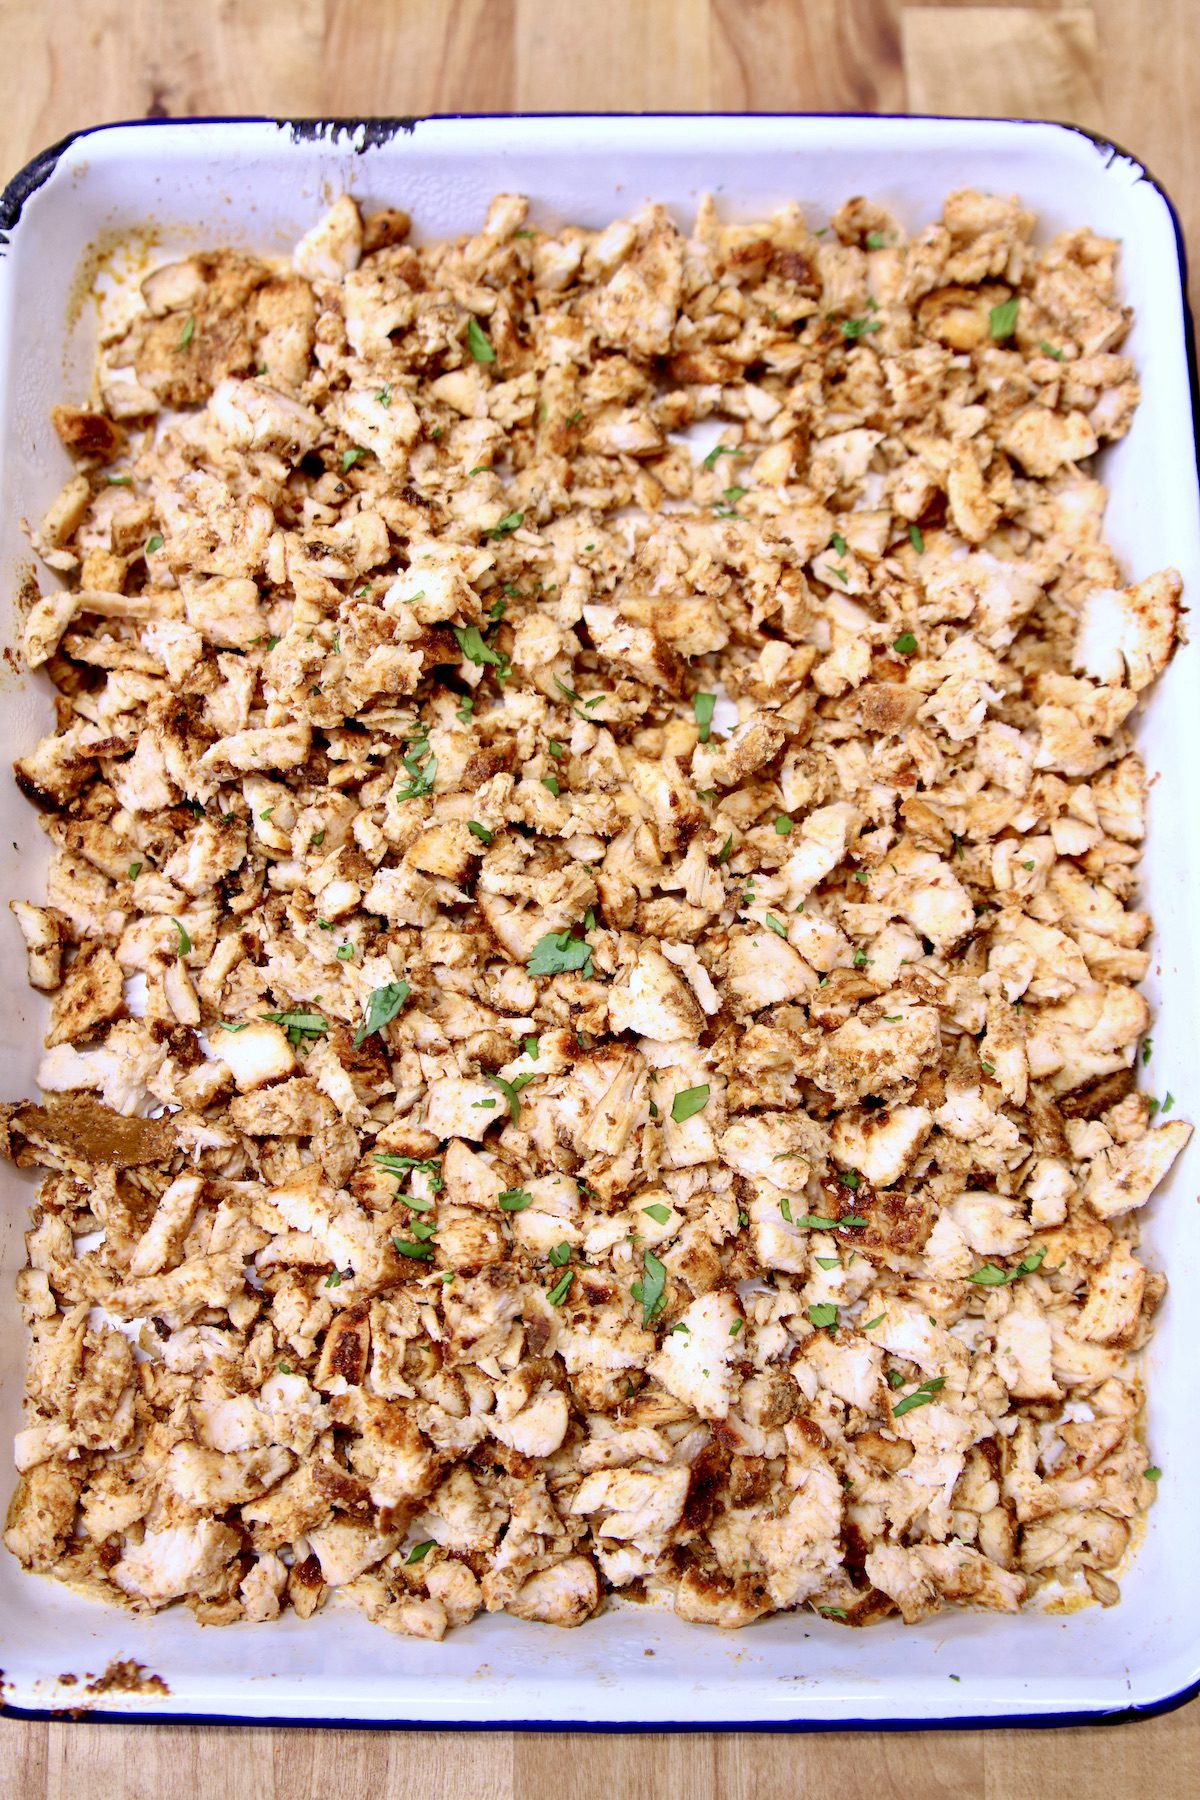 diced chicken in a white pan.